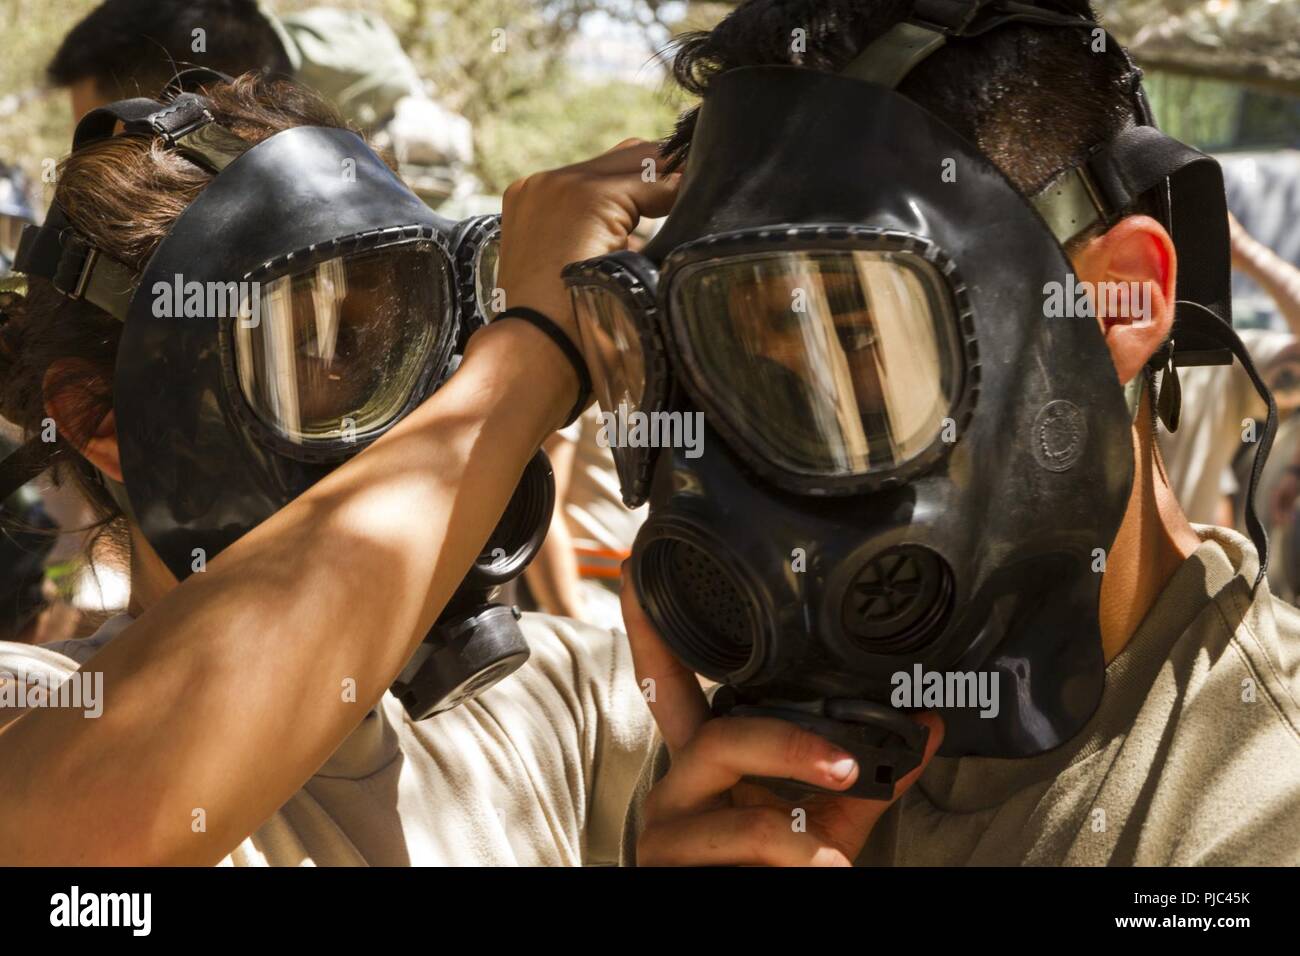 FORT HUNTER LIGGETT-- U.S. Army Spcs. Destini Faulks and Victor Moreno of the 348th Transportation Company put on gas masks in response to a training scenario during the 91st Training Division's Combat Support Training Exercise (CSTX 91-18-01) on July 11, 2018 in Ft. Hunter Liggett, California. The CSTX 91-18-01 ensures America’s Army Reserve units are trained to deploy bringing capable, combat-ready, and lethal firepower in support of the Army and our joint partners anywhere in the world. Stock Photo